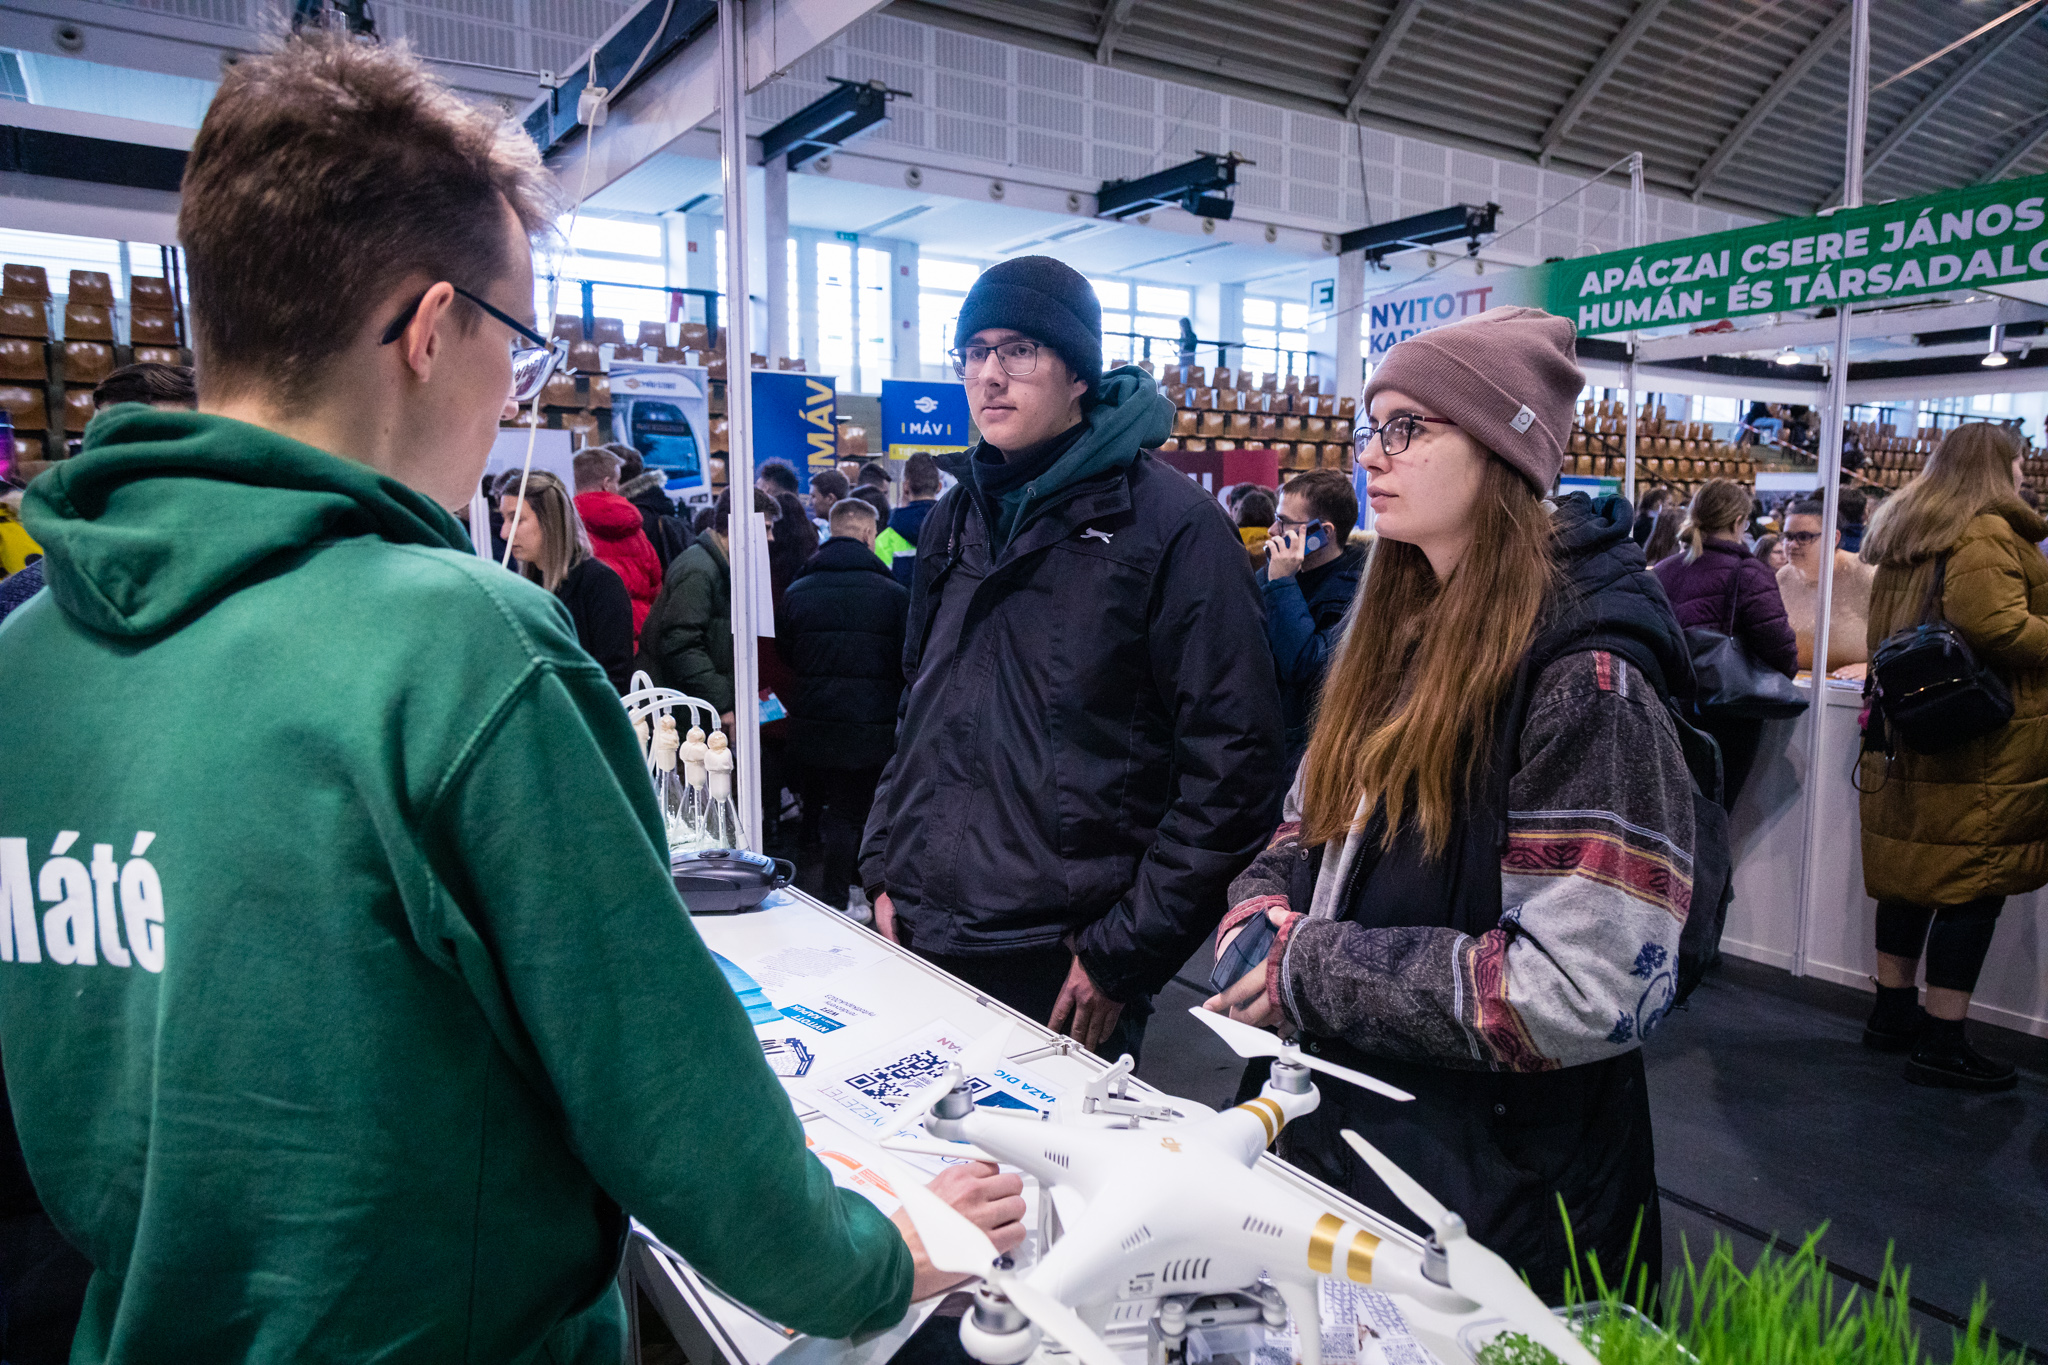 Krisztián Zaka from Csopak would like to continue his studies in Mosonmagyaróvár. The Albert Kázmér Faculty's stand also featured modern technologies and focused on sustainability.